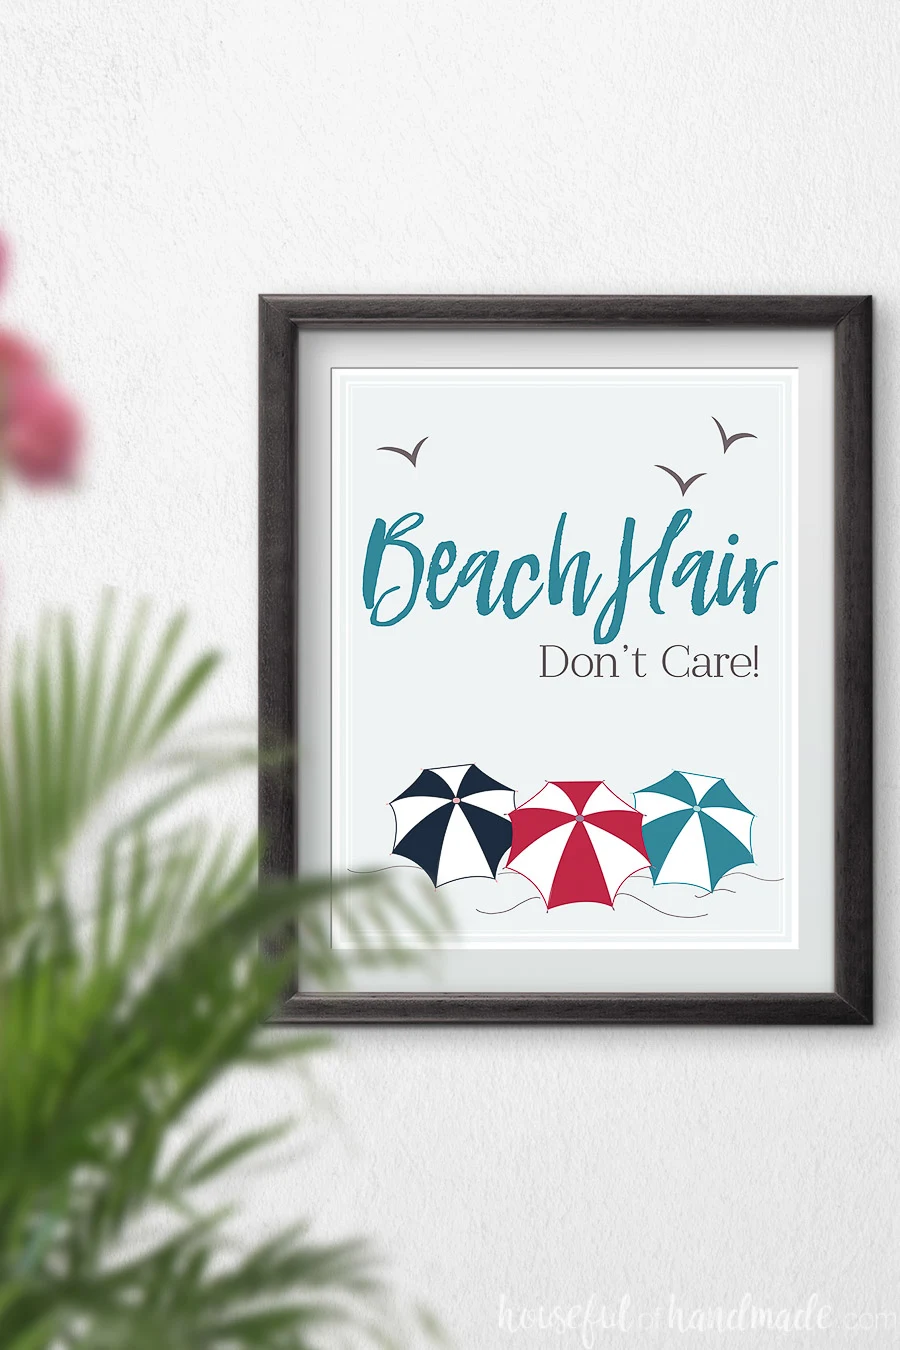 Beach Hair don't care art with beach umbrellas in red, turquoise and navy. 